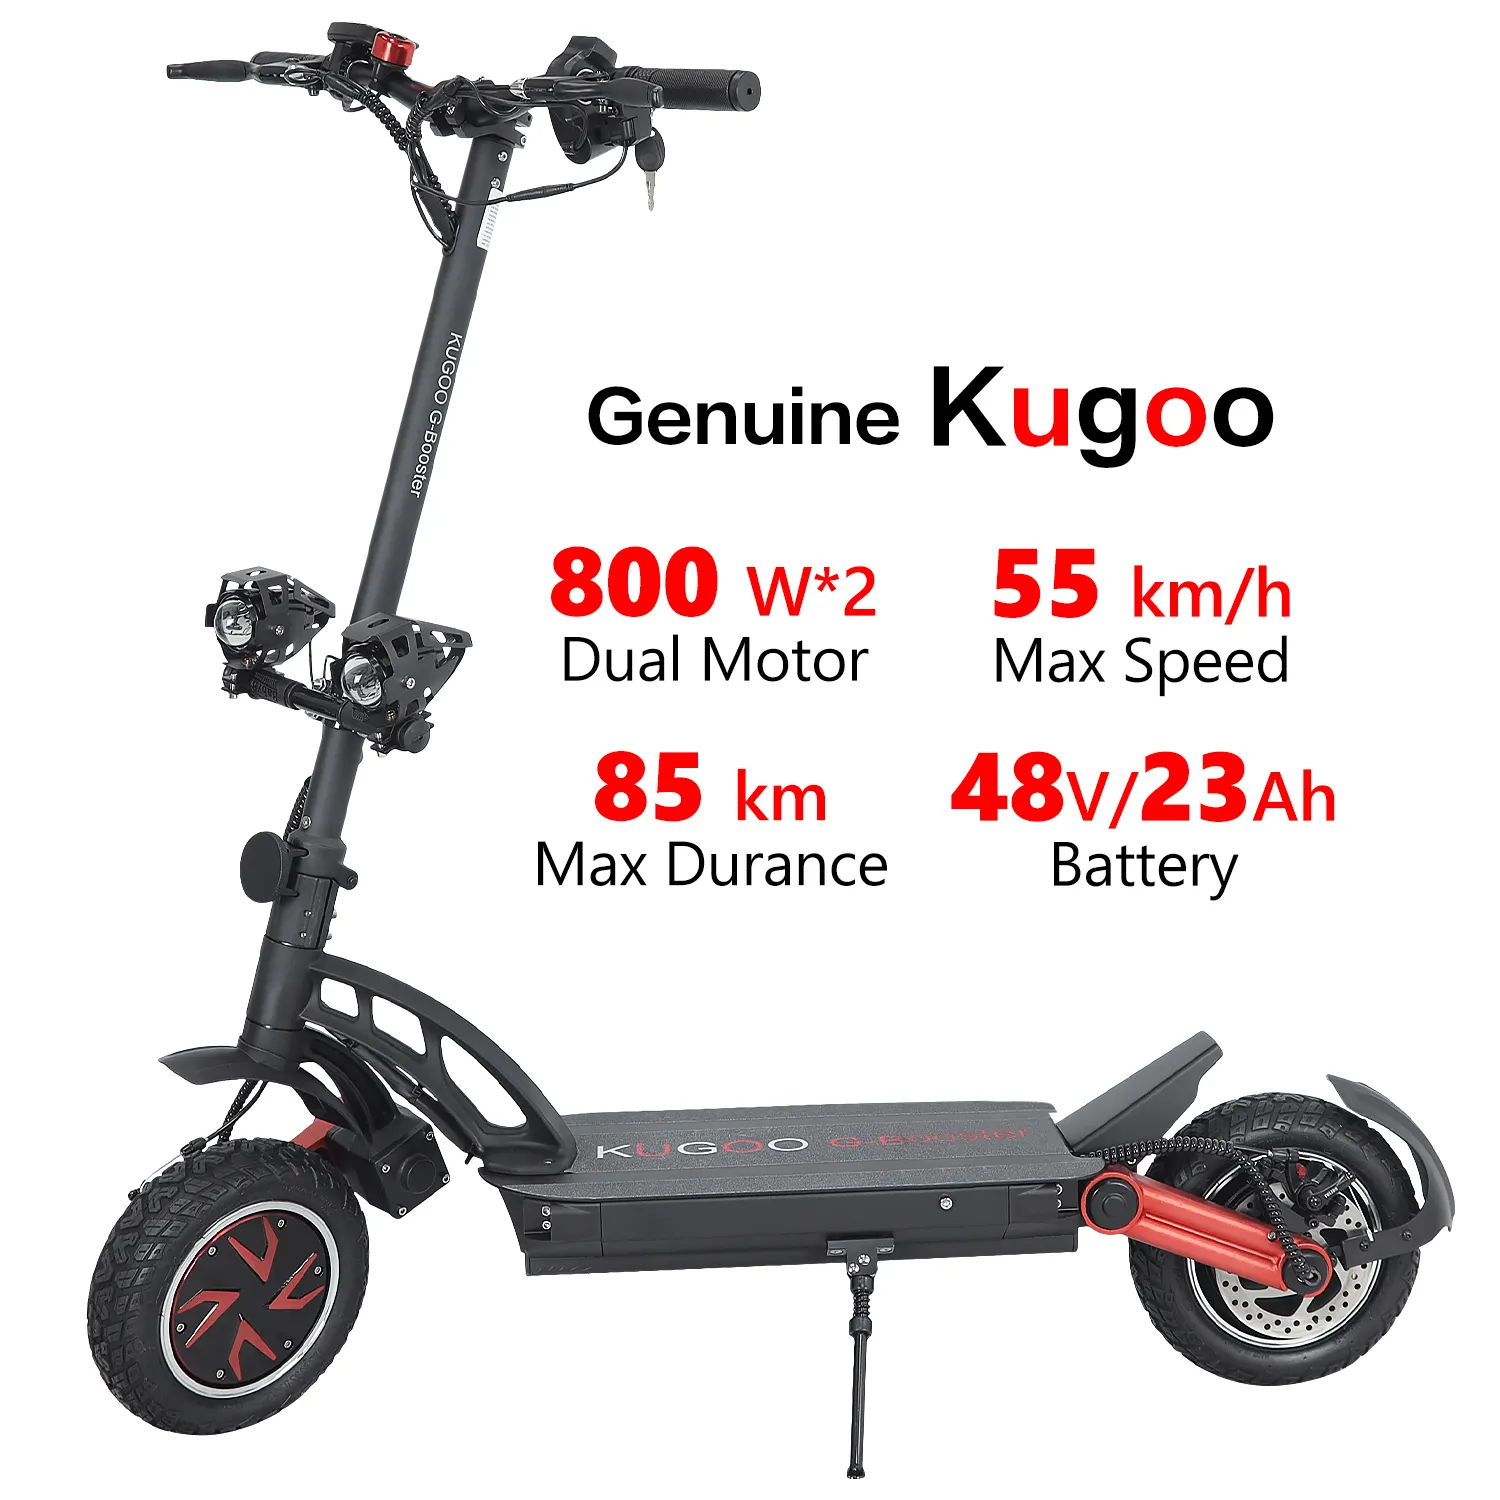 EU warehouse e scooter off road kugoo g booster electric scooter dual motor 800w*2 55km/h mobility electric kick scooters